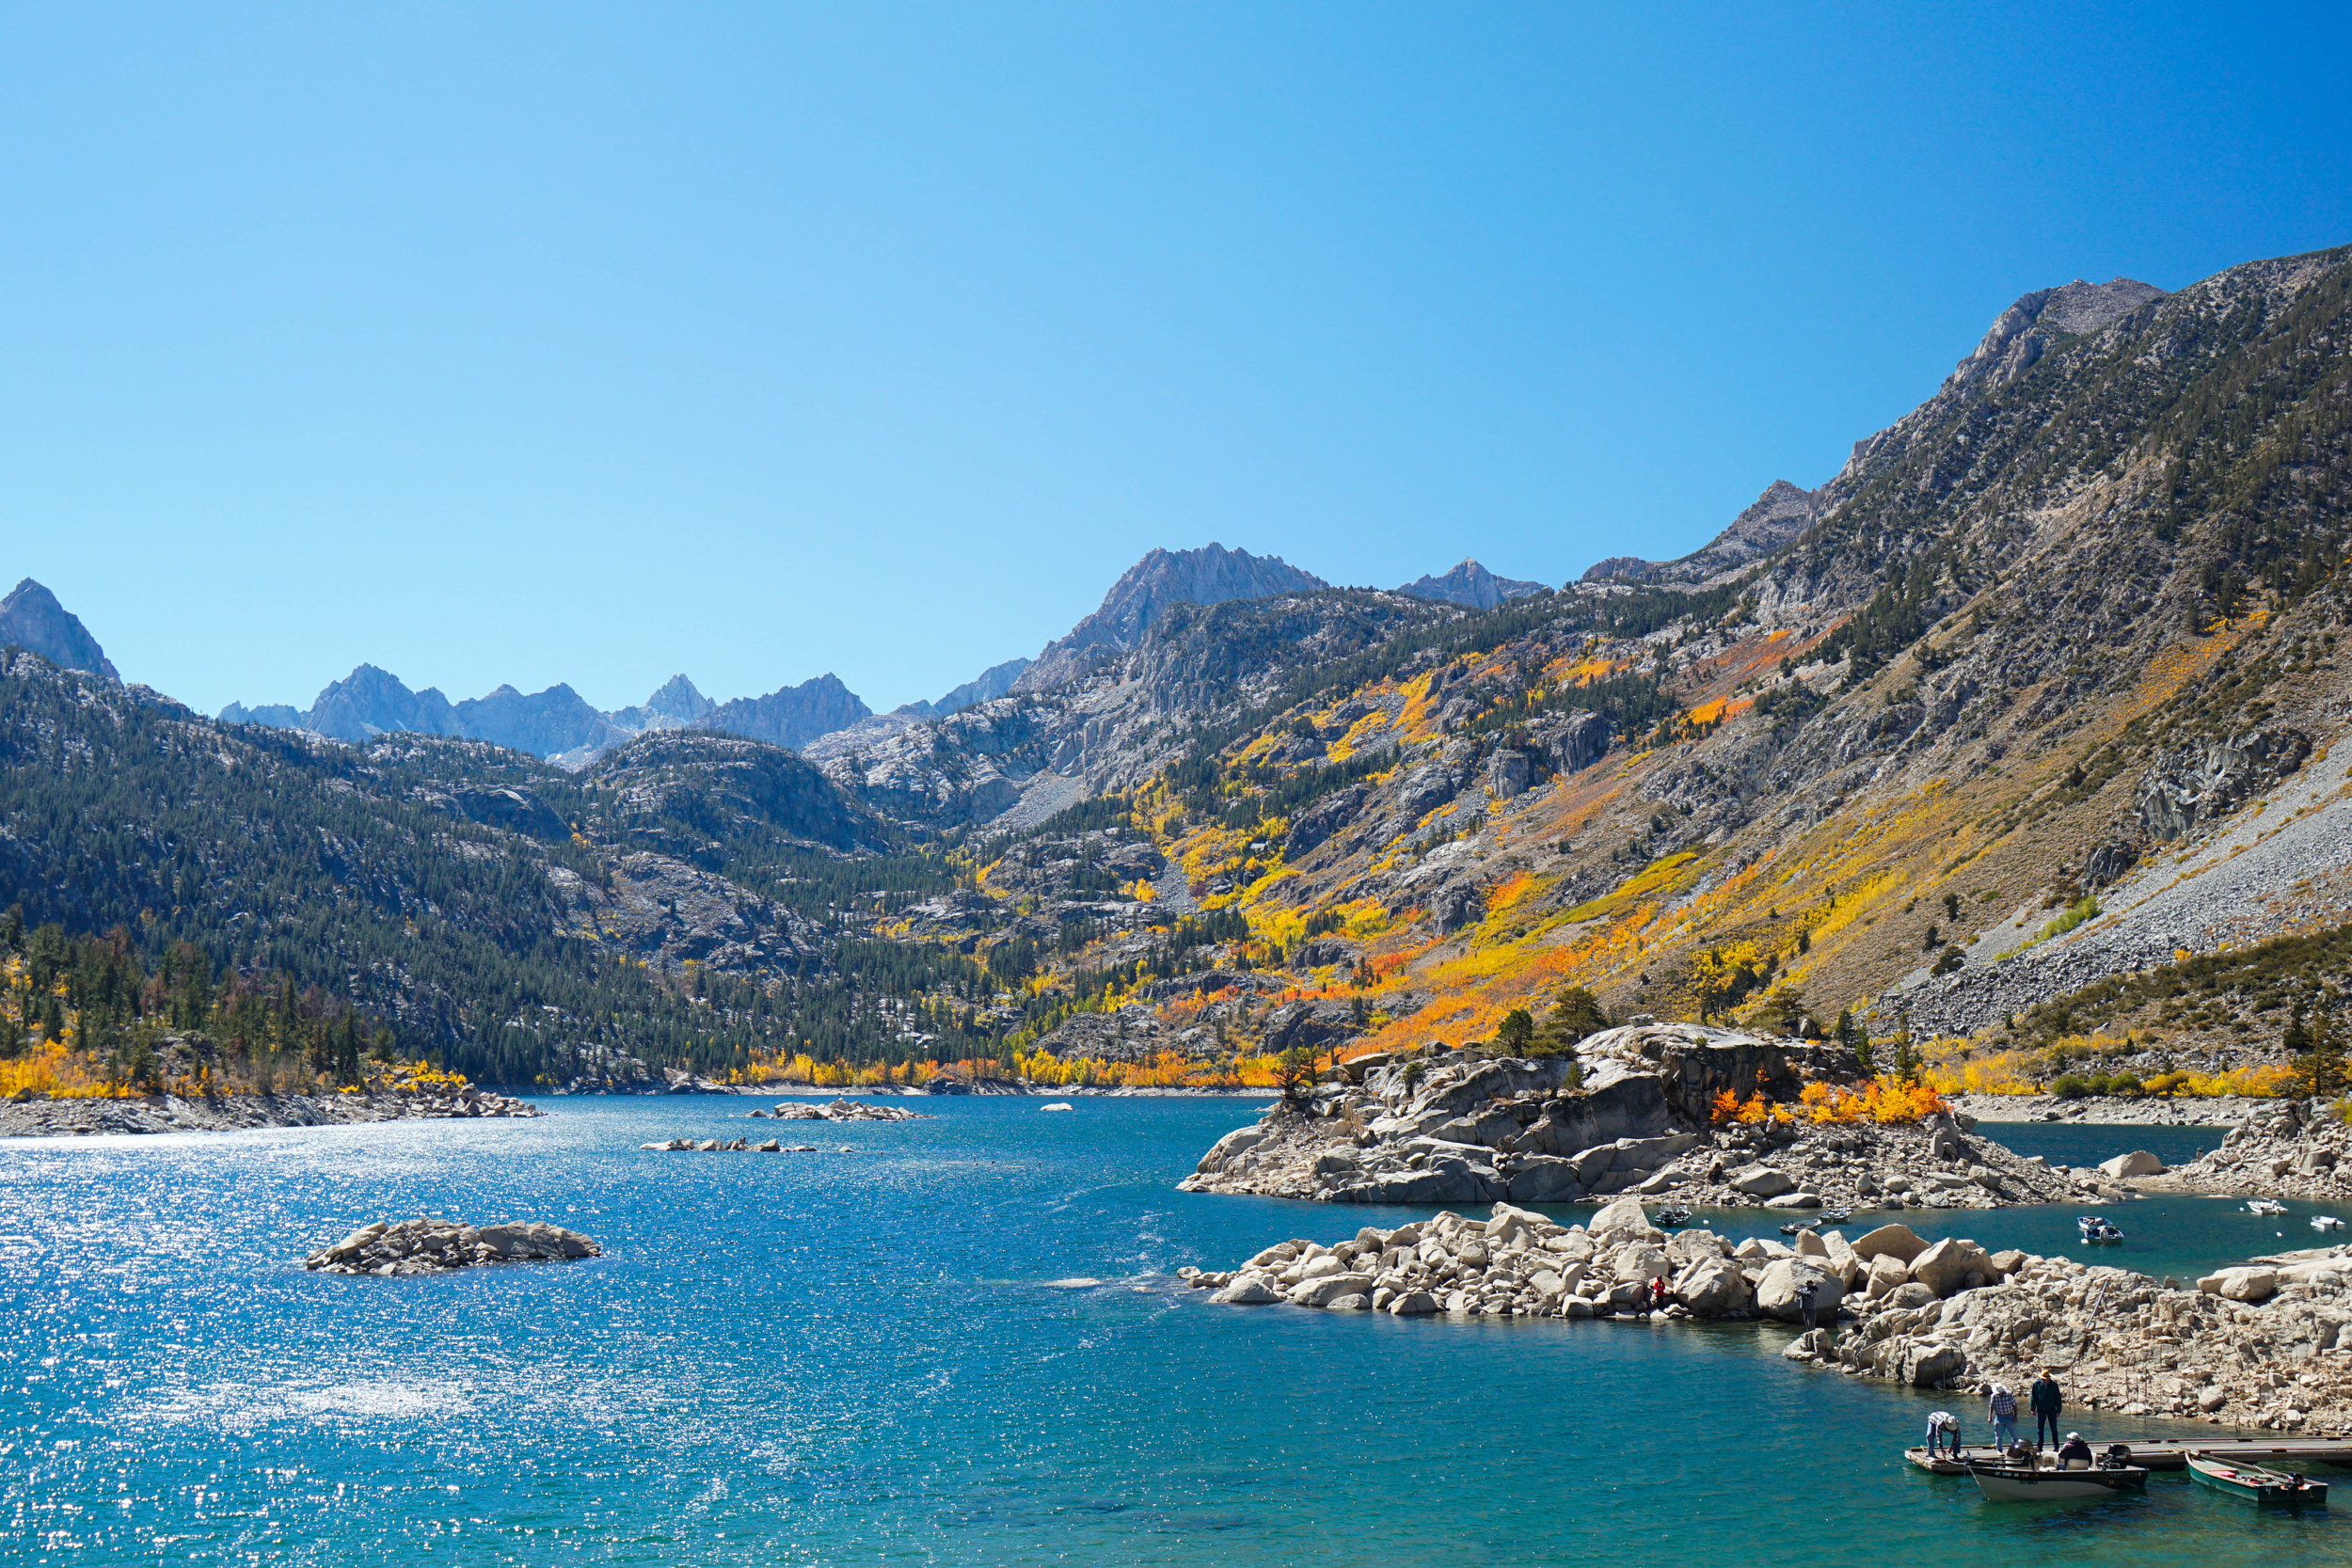 Who says California doesn't have seasons? We come upon a Fall Spectacular at our 1st lake of the day.